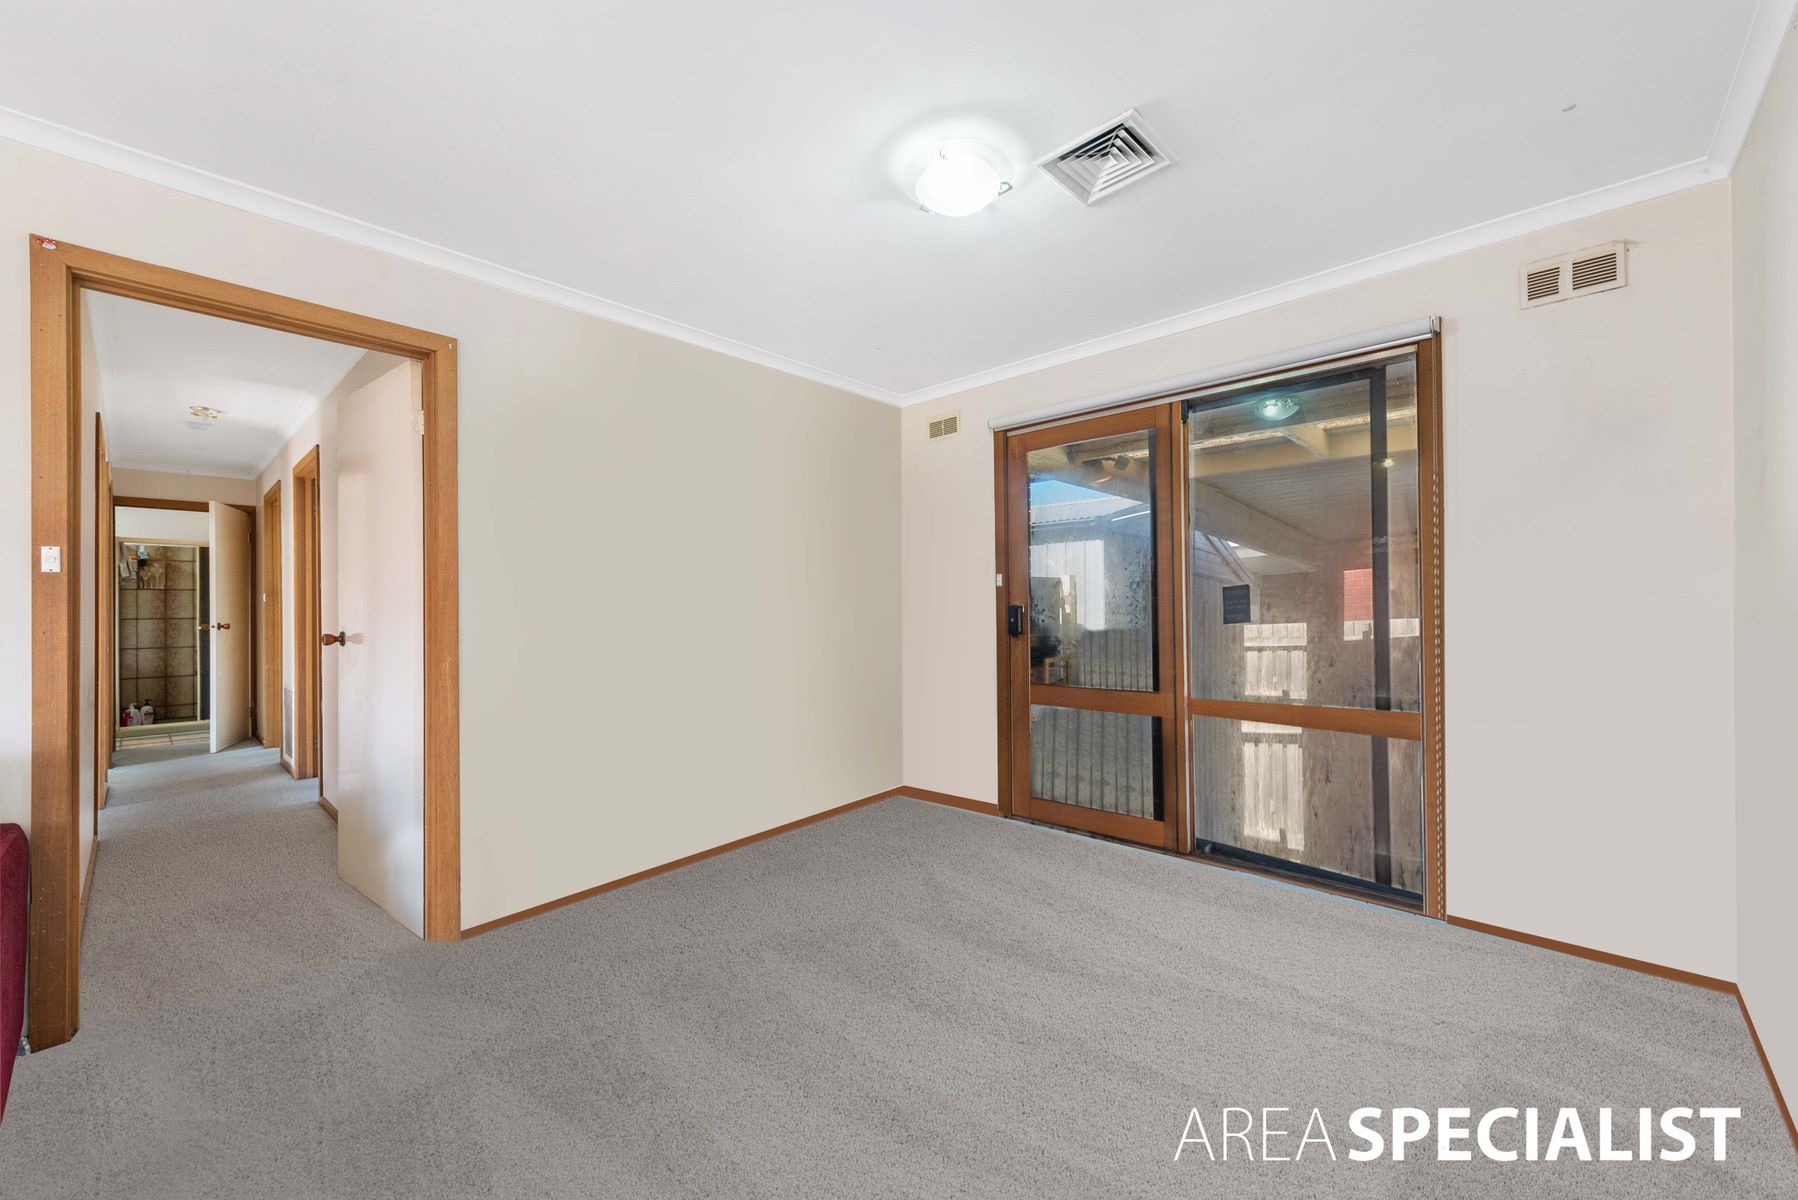 170 Derrimut Rd, Hoppers Crossing 4420